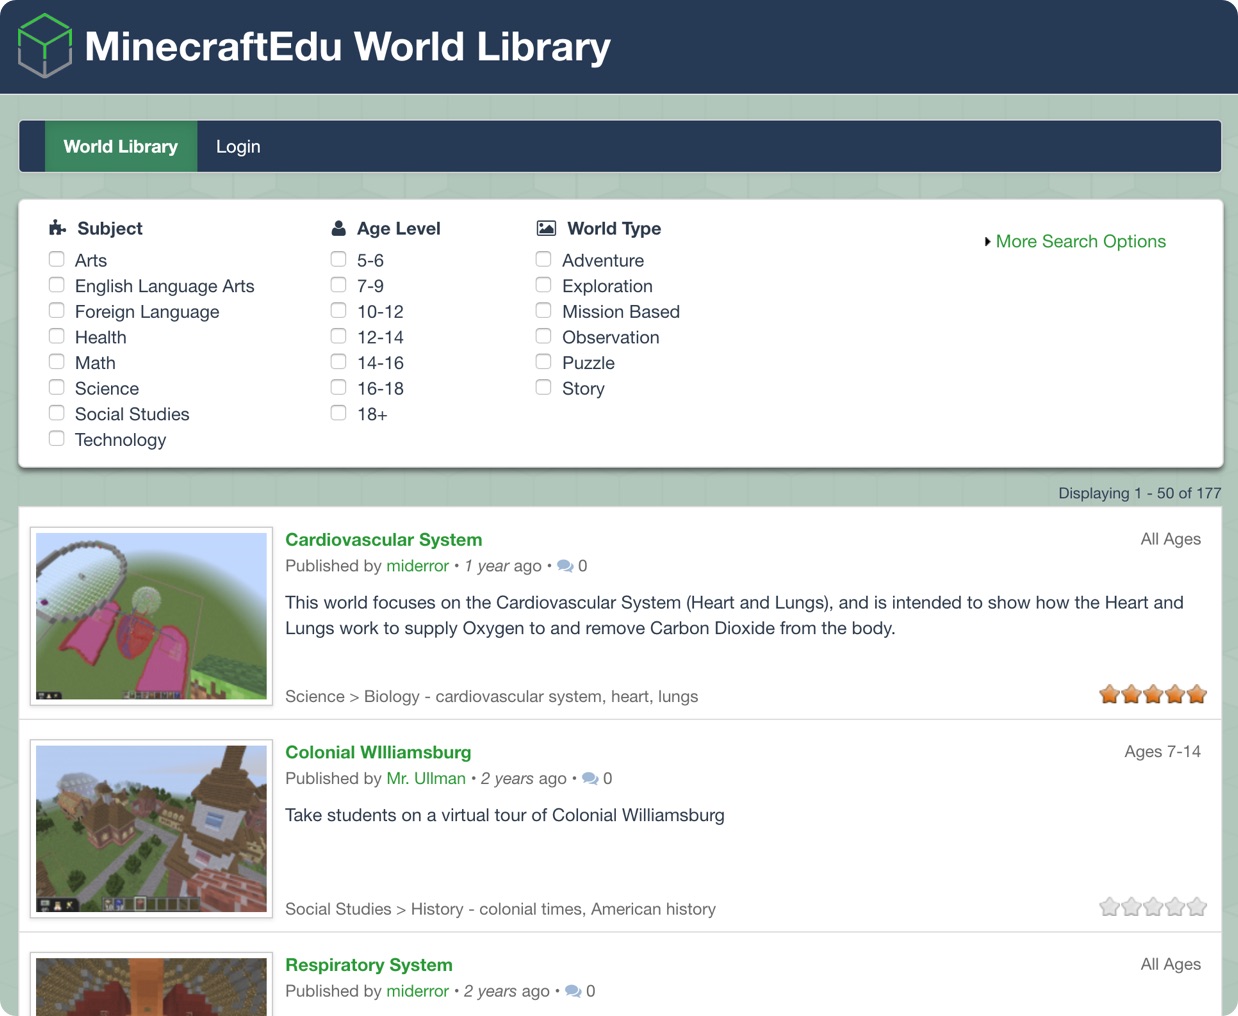 MinecraftEdu World Library Cover Image